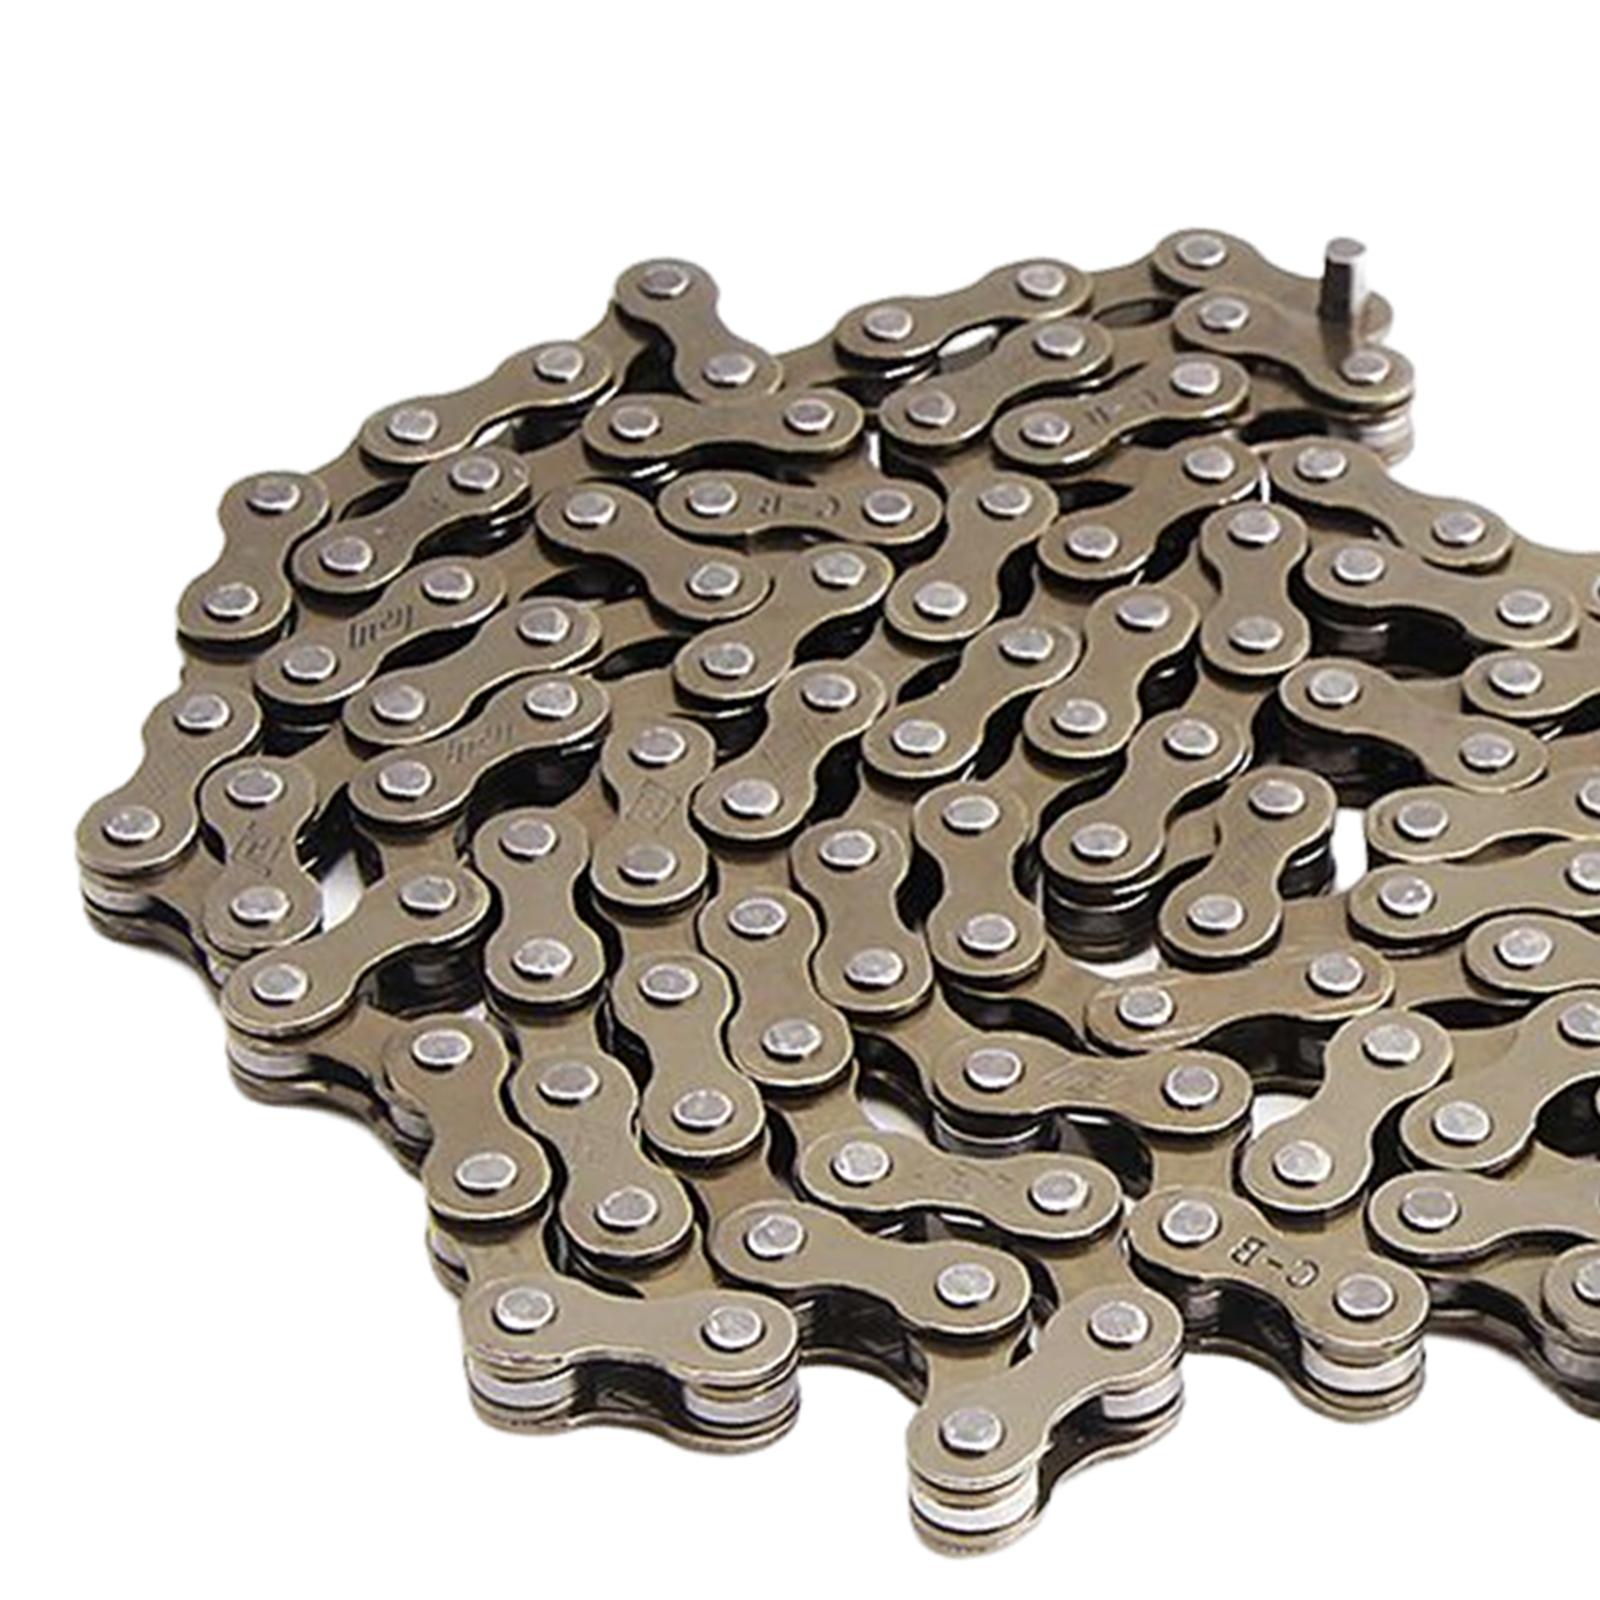 MTB Bicycle Chain 116 Links Steel Replacement Component Part Repair